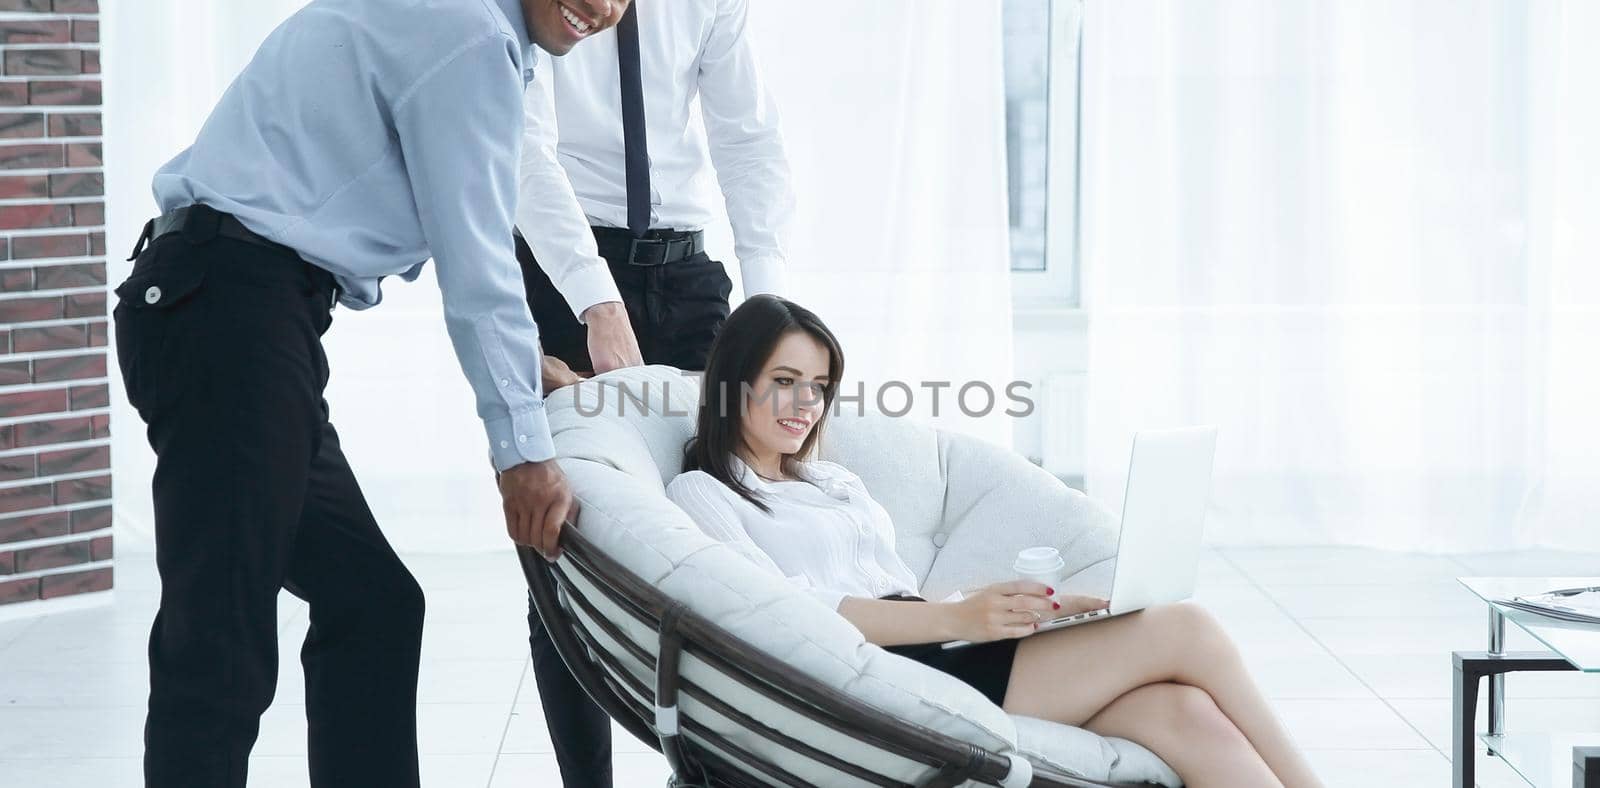 business woman with colleagues discussing work issues,sitting in a comfortable chair